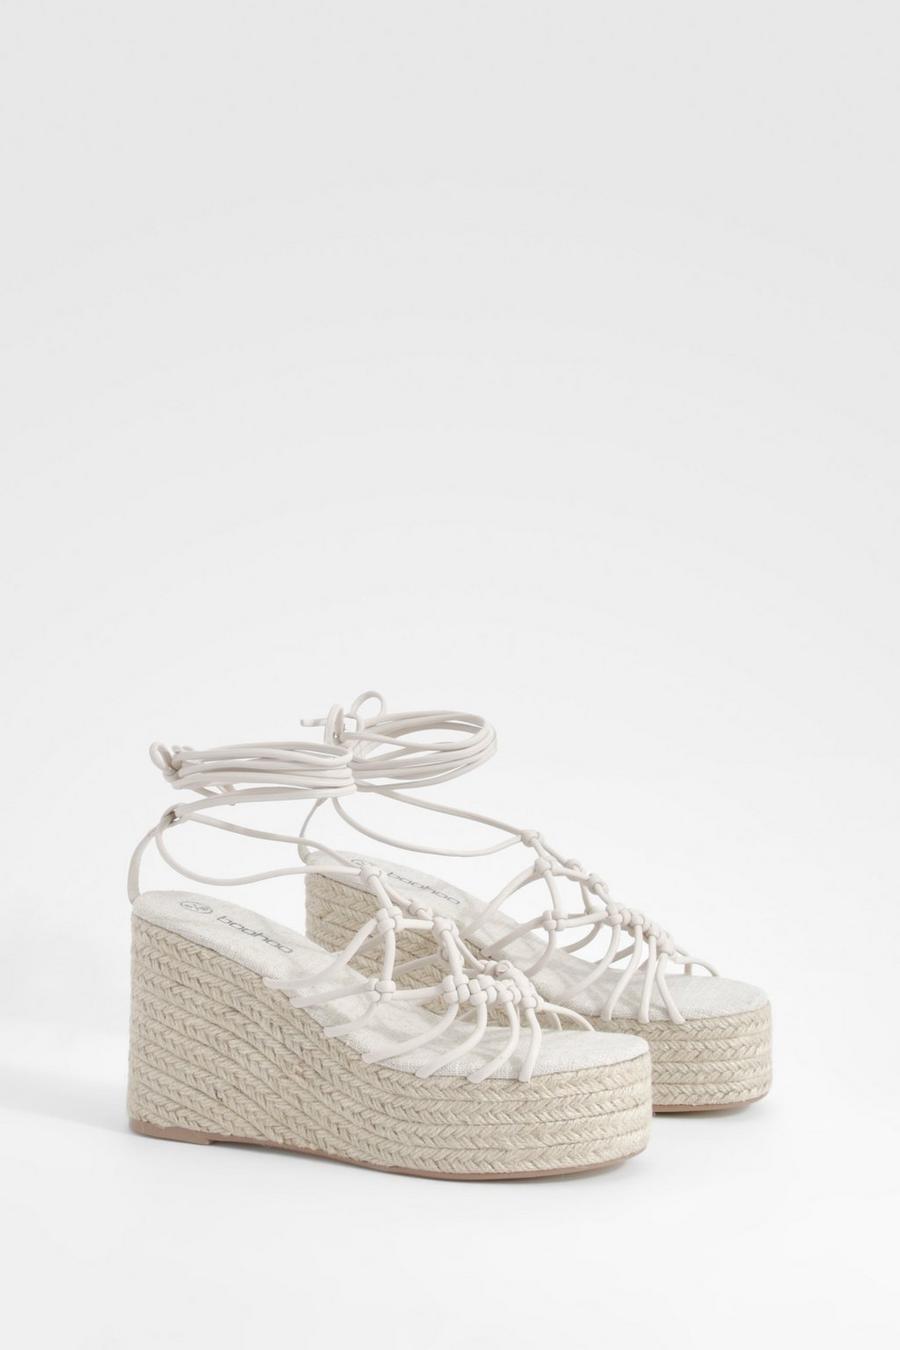 Cream Knot Detail Mid Height Wedges